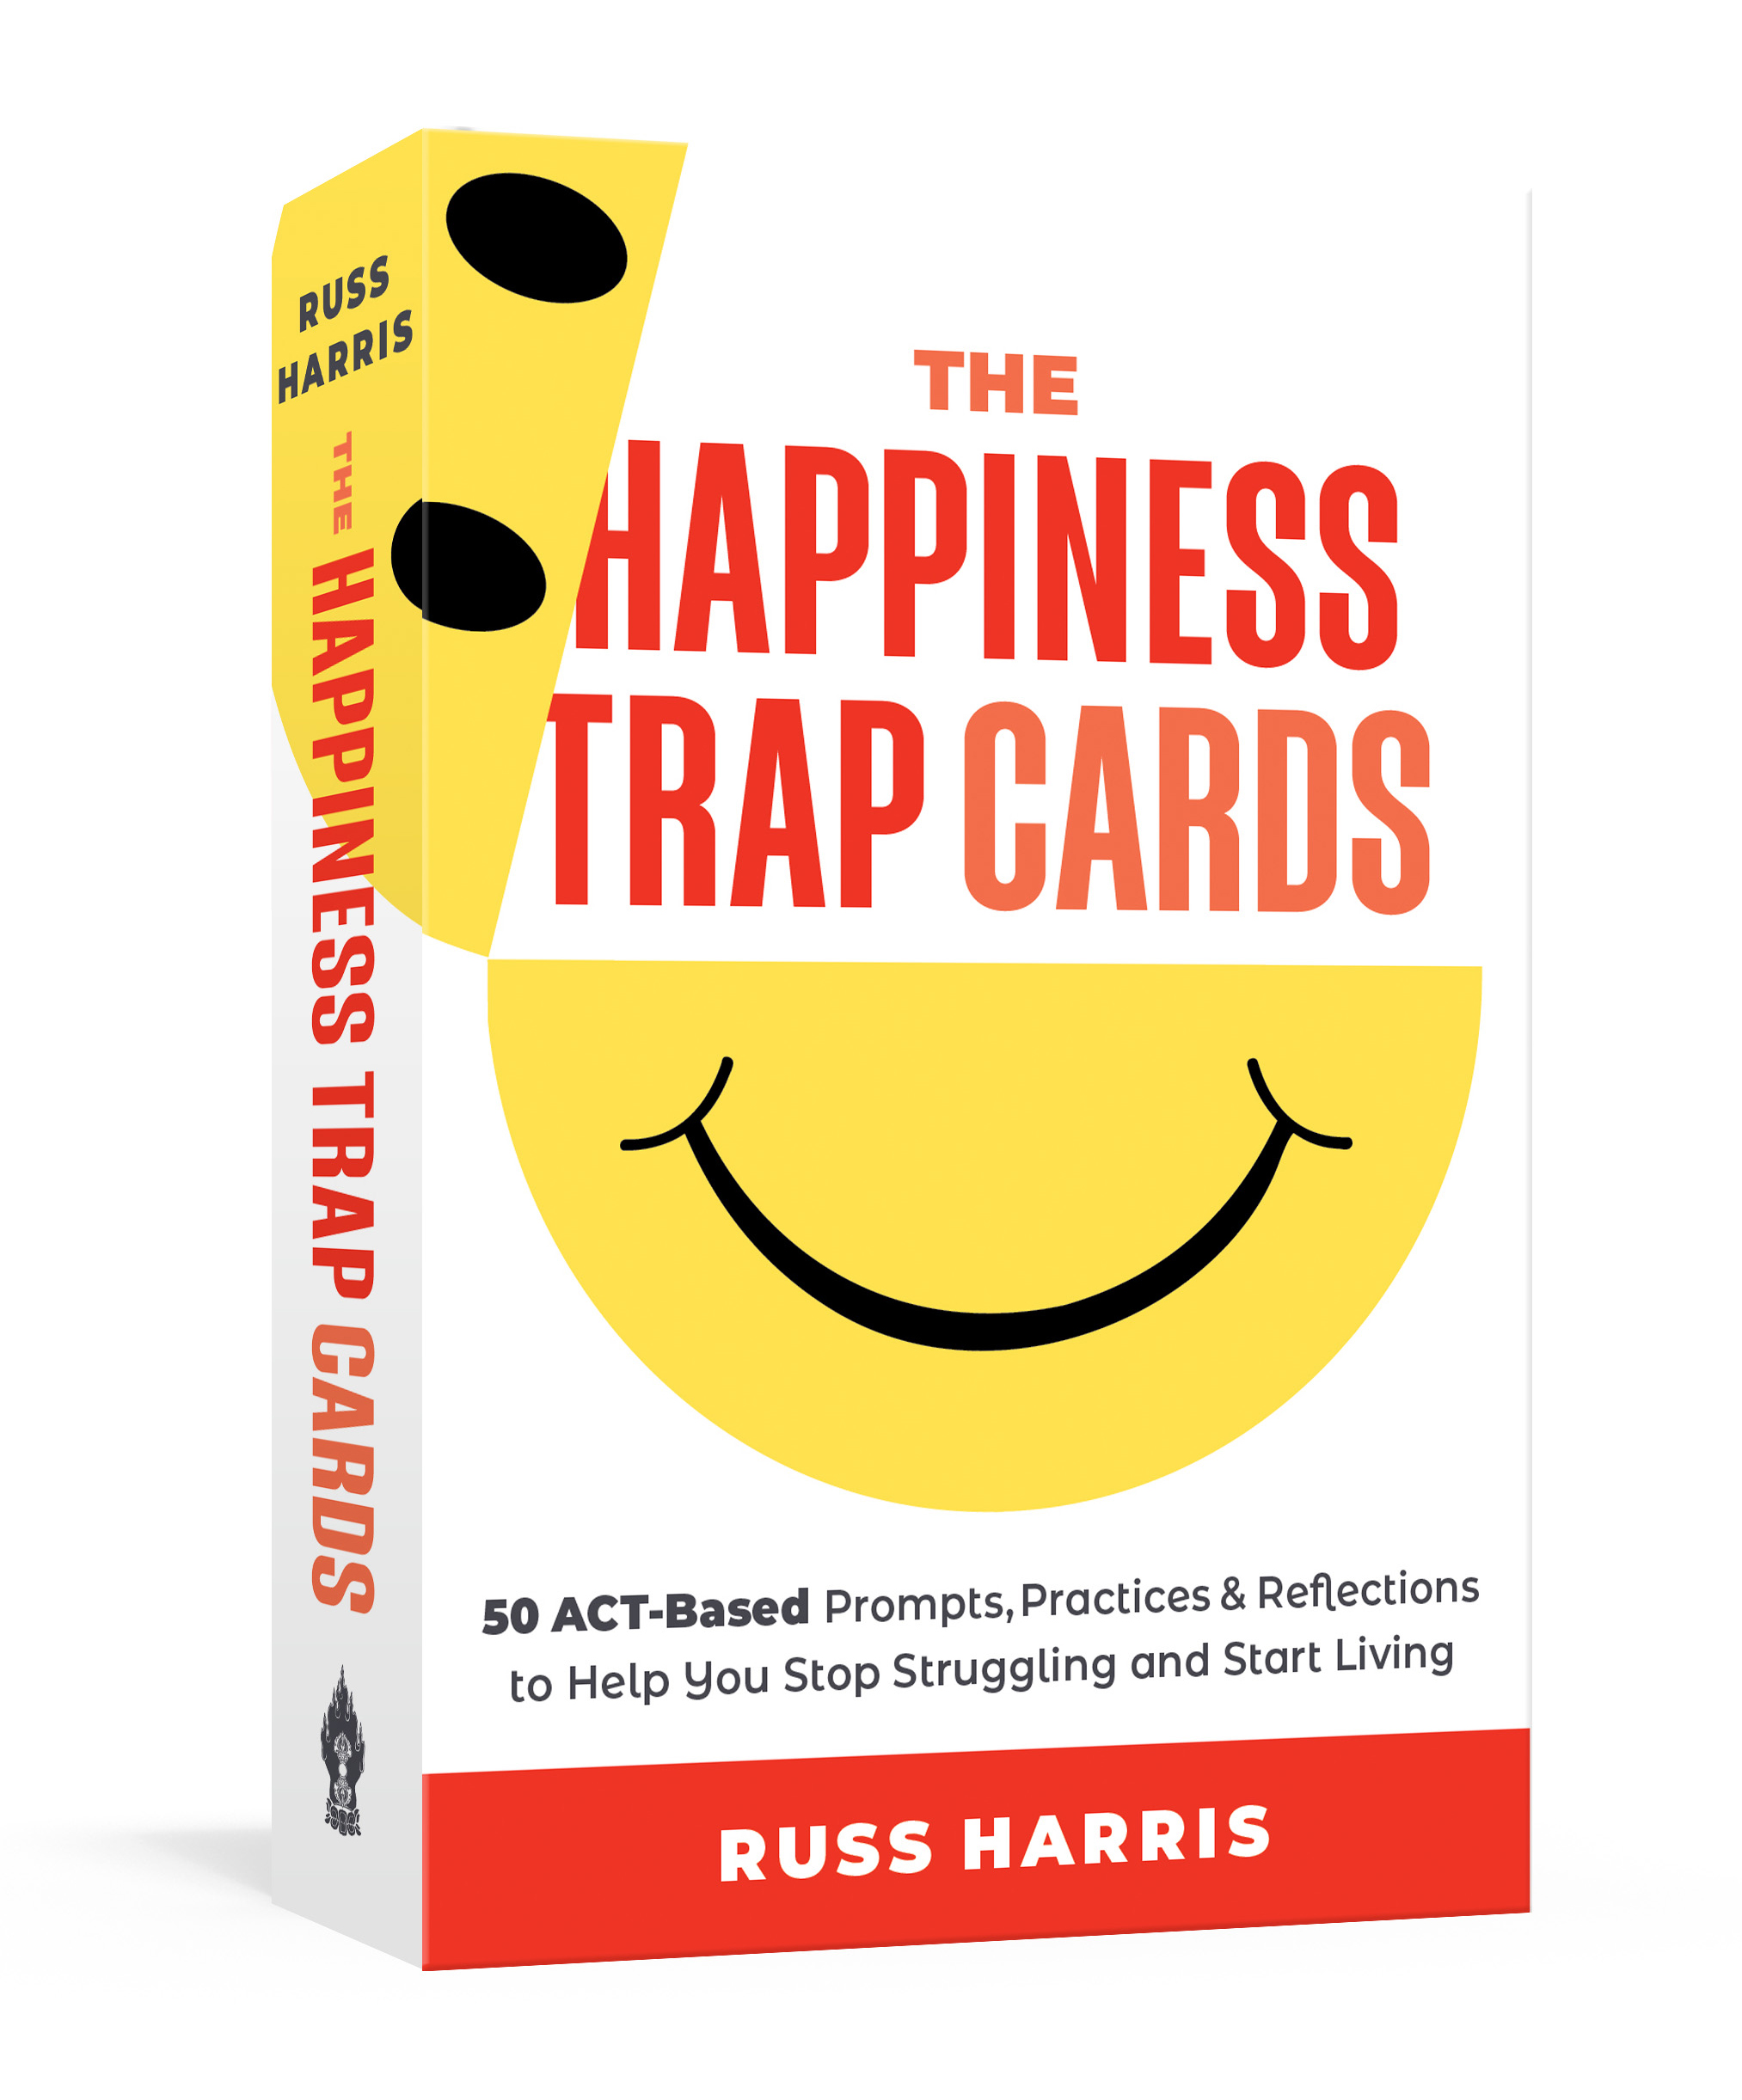 The Happiness Trap Cards. 50 ACT-Based Prompts, Practices & Reflections to Help You Stop Struggling and Start Living by Russ Harris